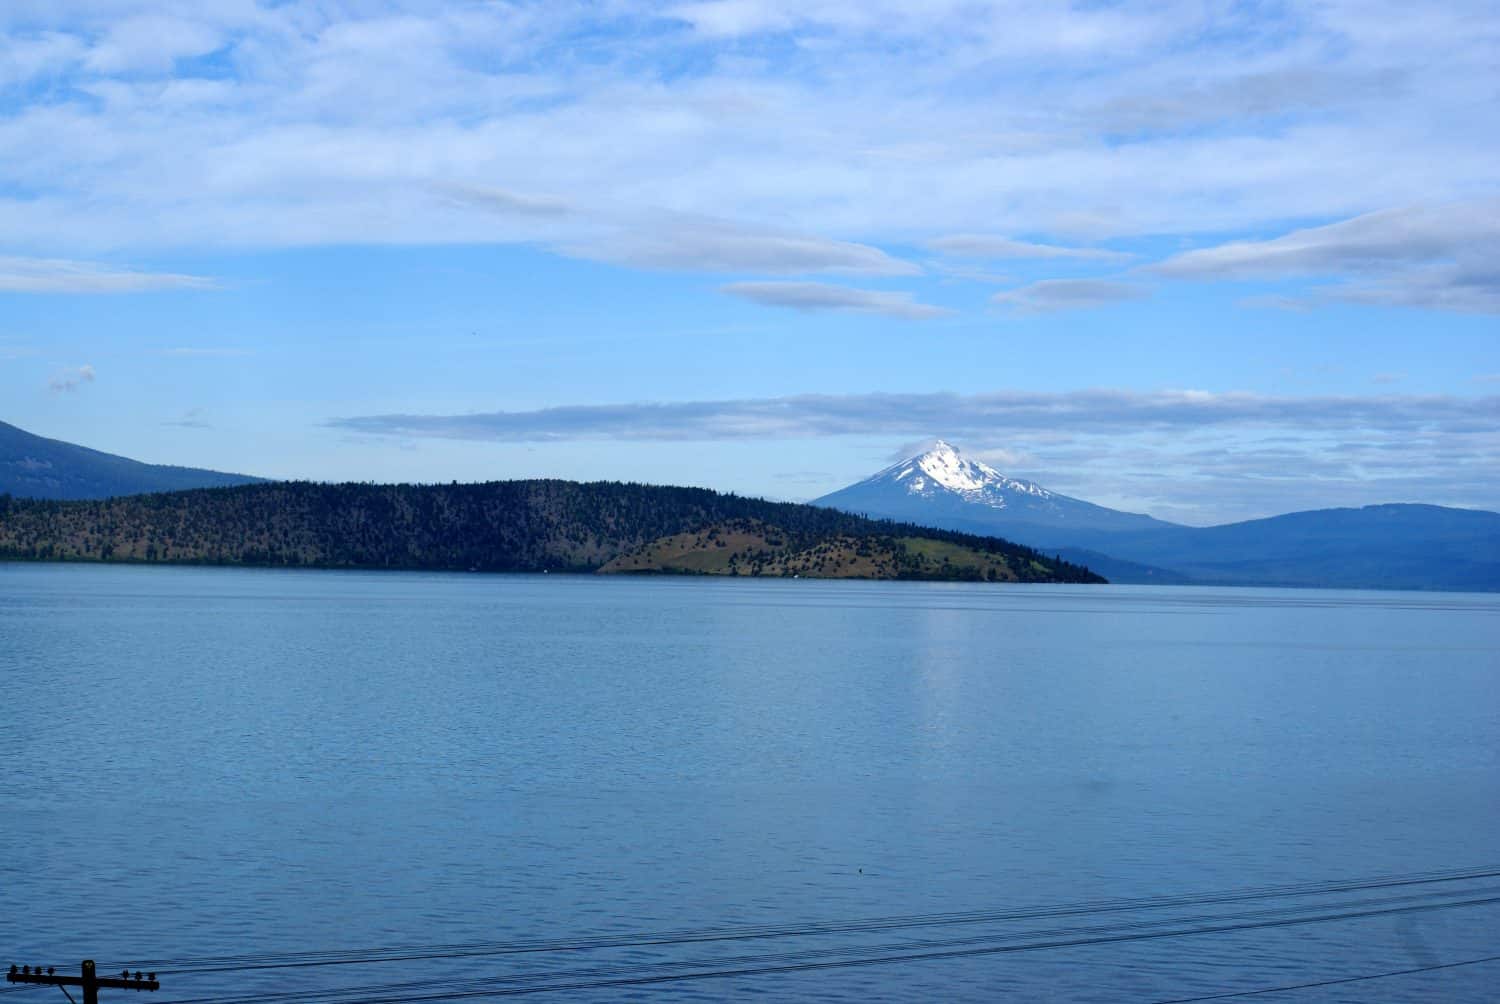 Upper Klamath Lake, shallow freshwater lake east of Cascade Range in south-central Oregon, USA , rich in fish, blue green algae, snow covered peak of Mt. McLoughlin in background.